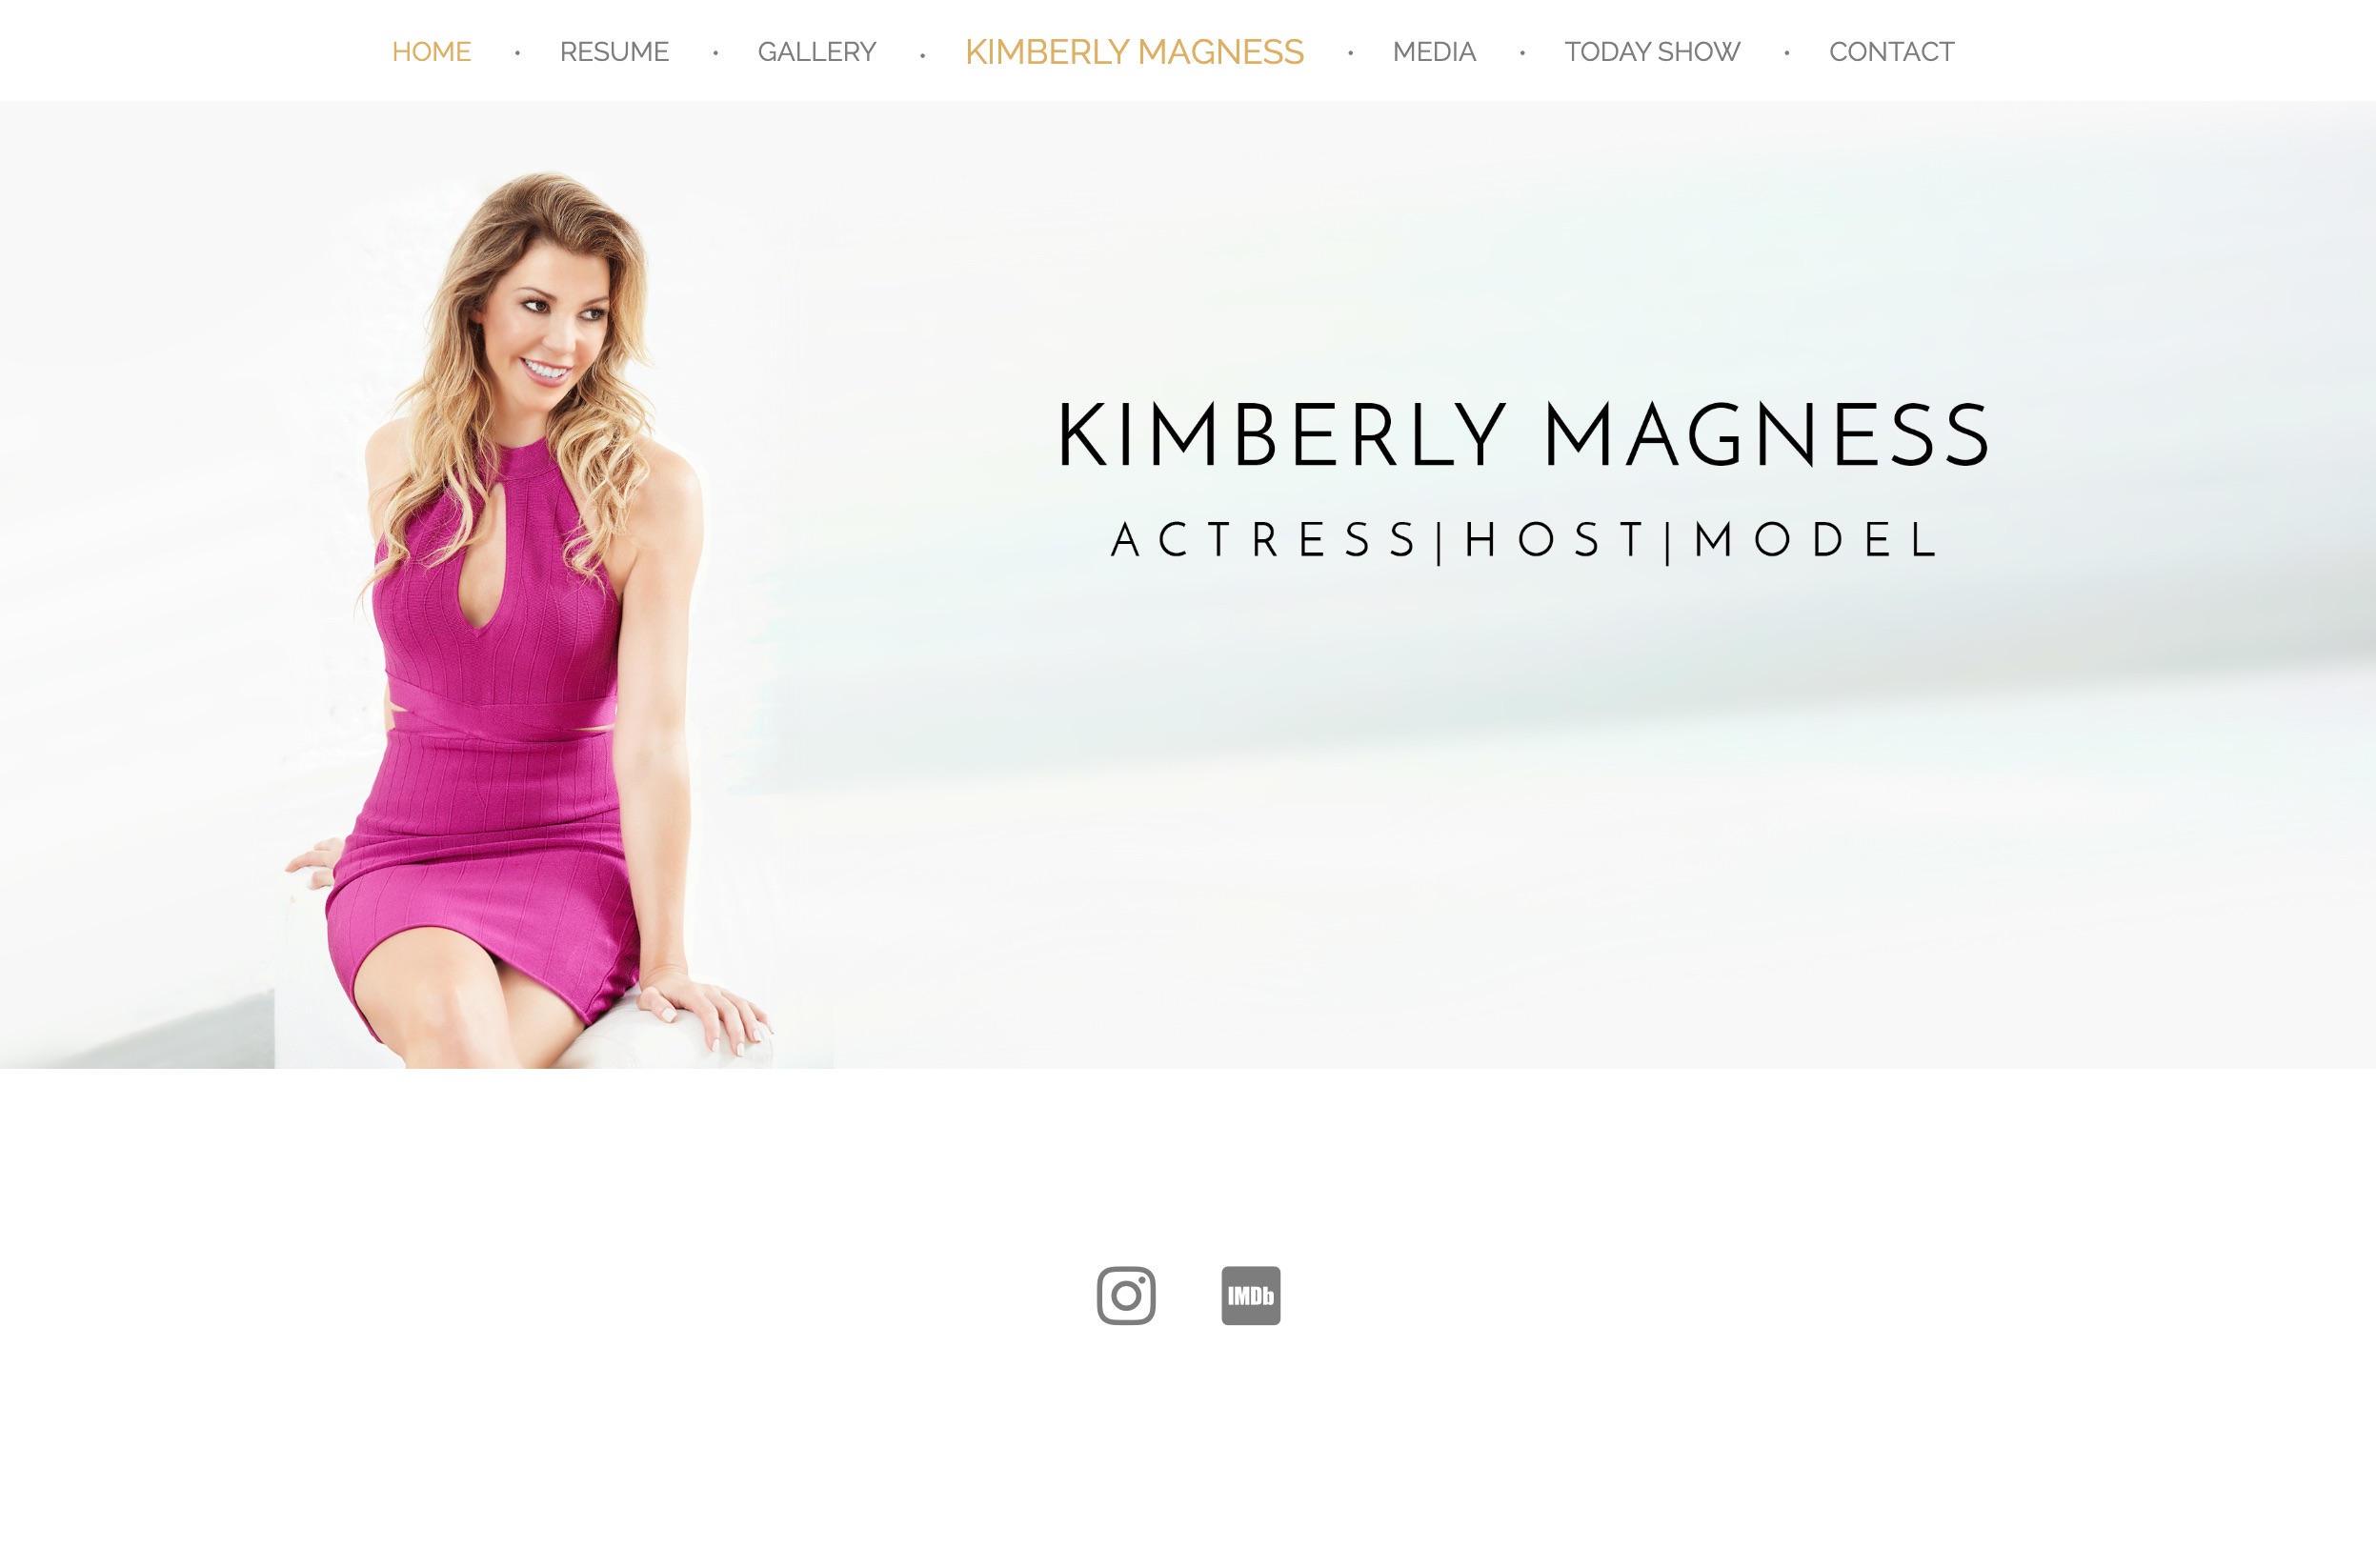 image of Kimberly Magness